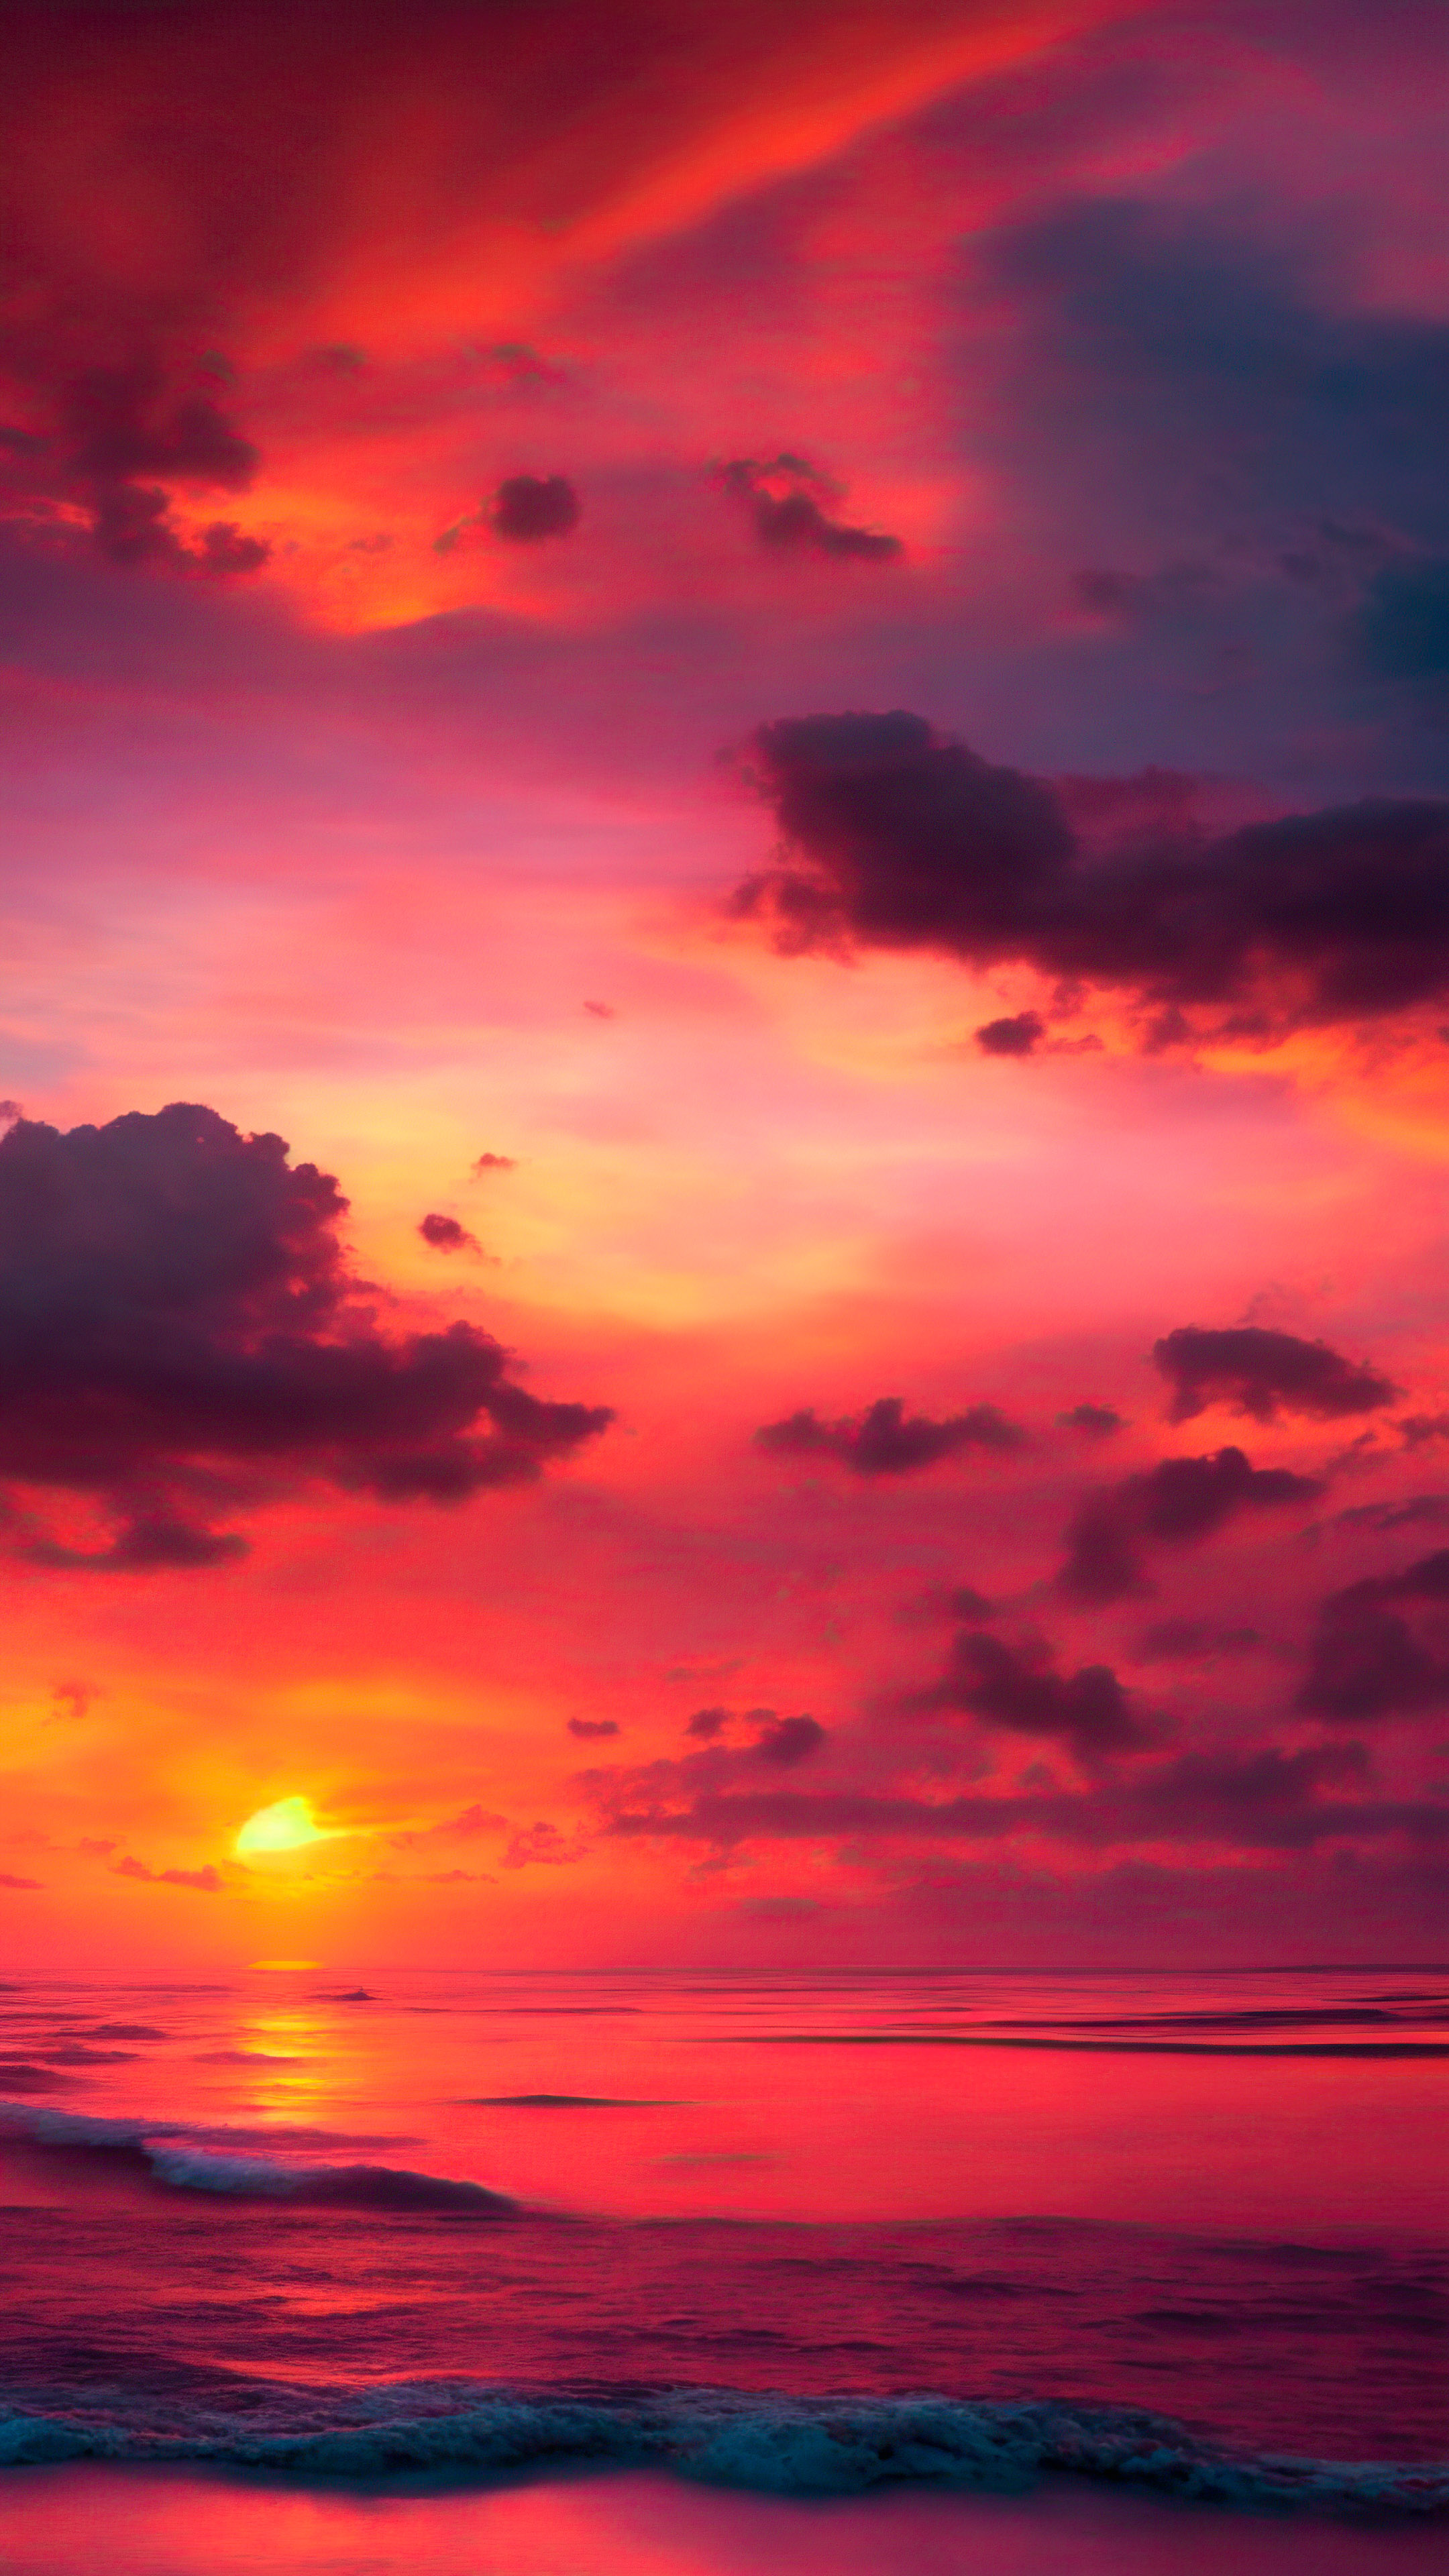 Adorn your IOS screen with sky iPhone background, showcasing a mesmerizing sunset over an expansive ocean, with fiery hues of orange and pink.